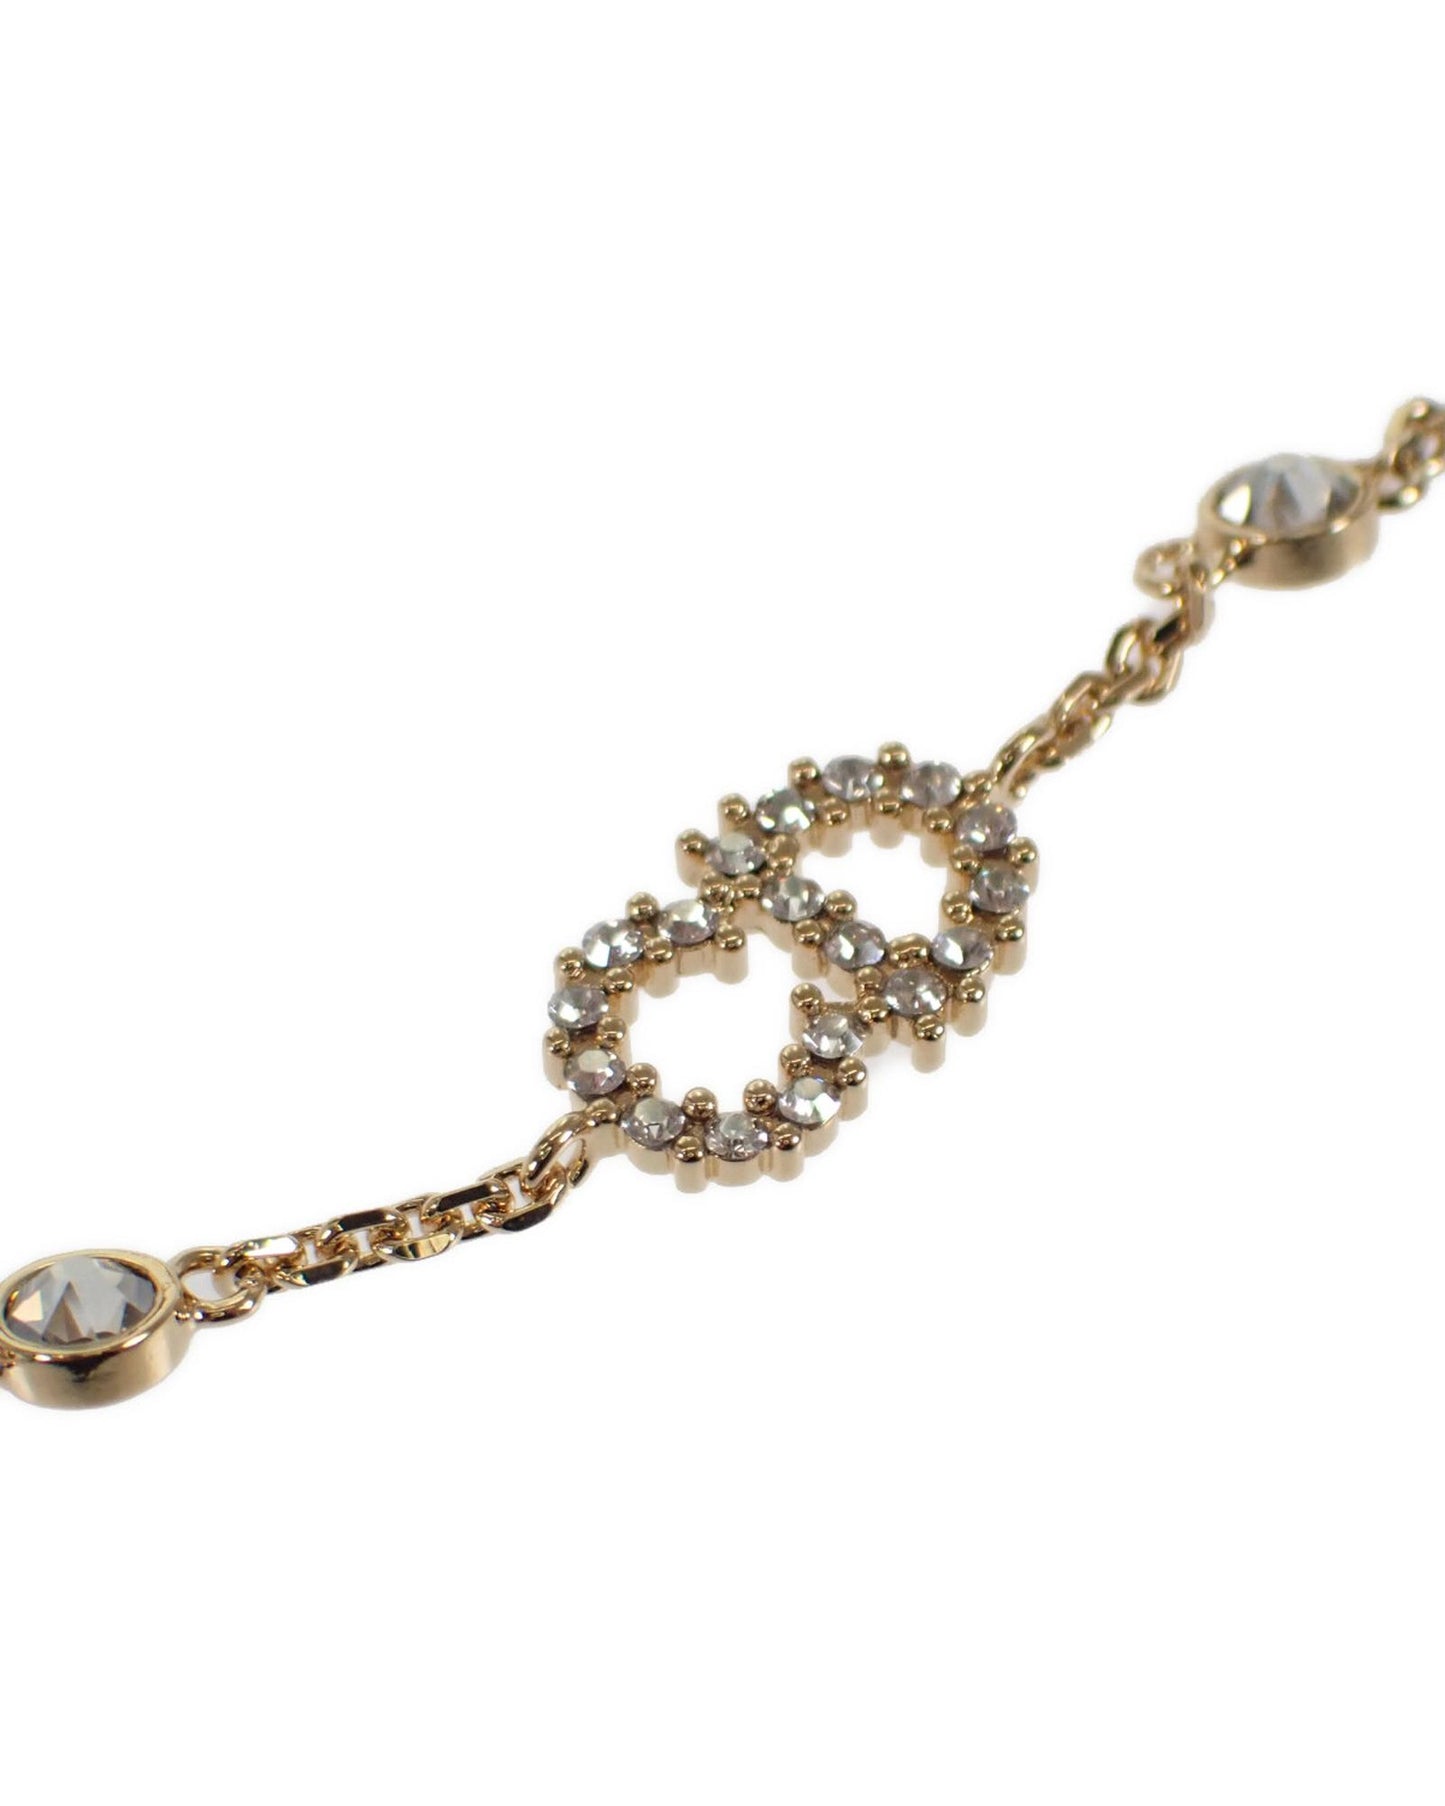 Dior Women's Gold Moon Bracelet - Excellent Condition in Gold